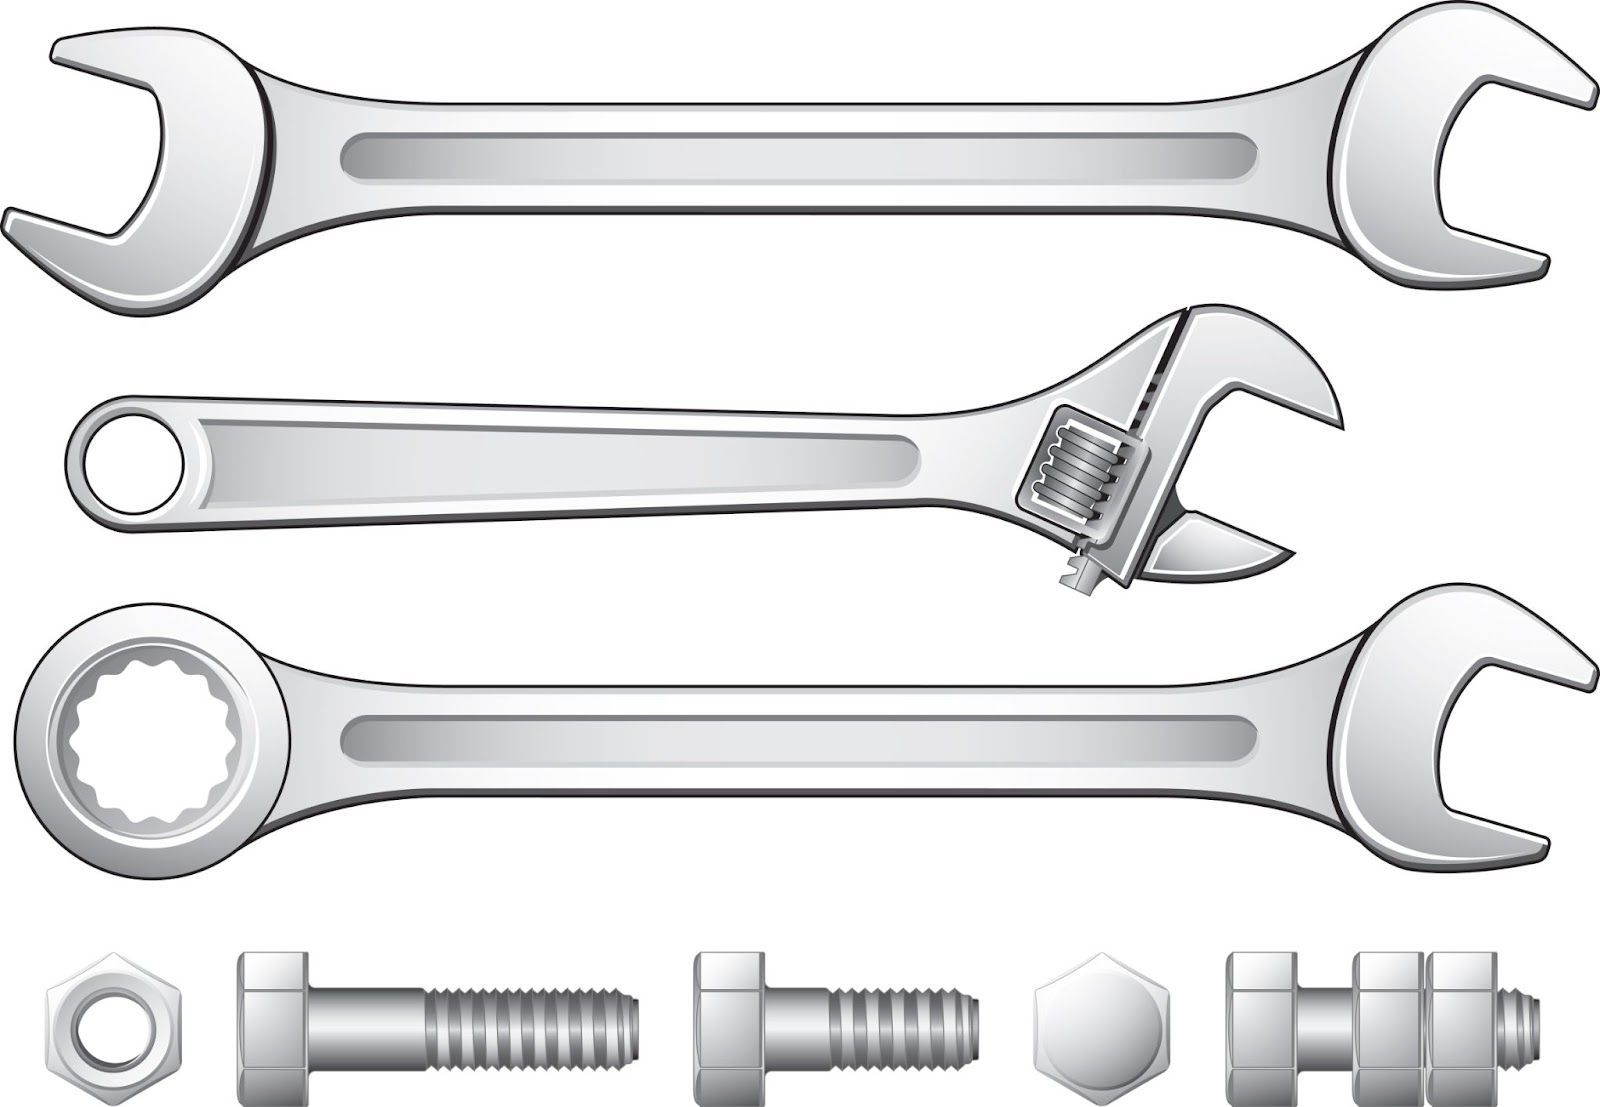 Types Of Wrenches And Their Uses